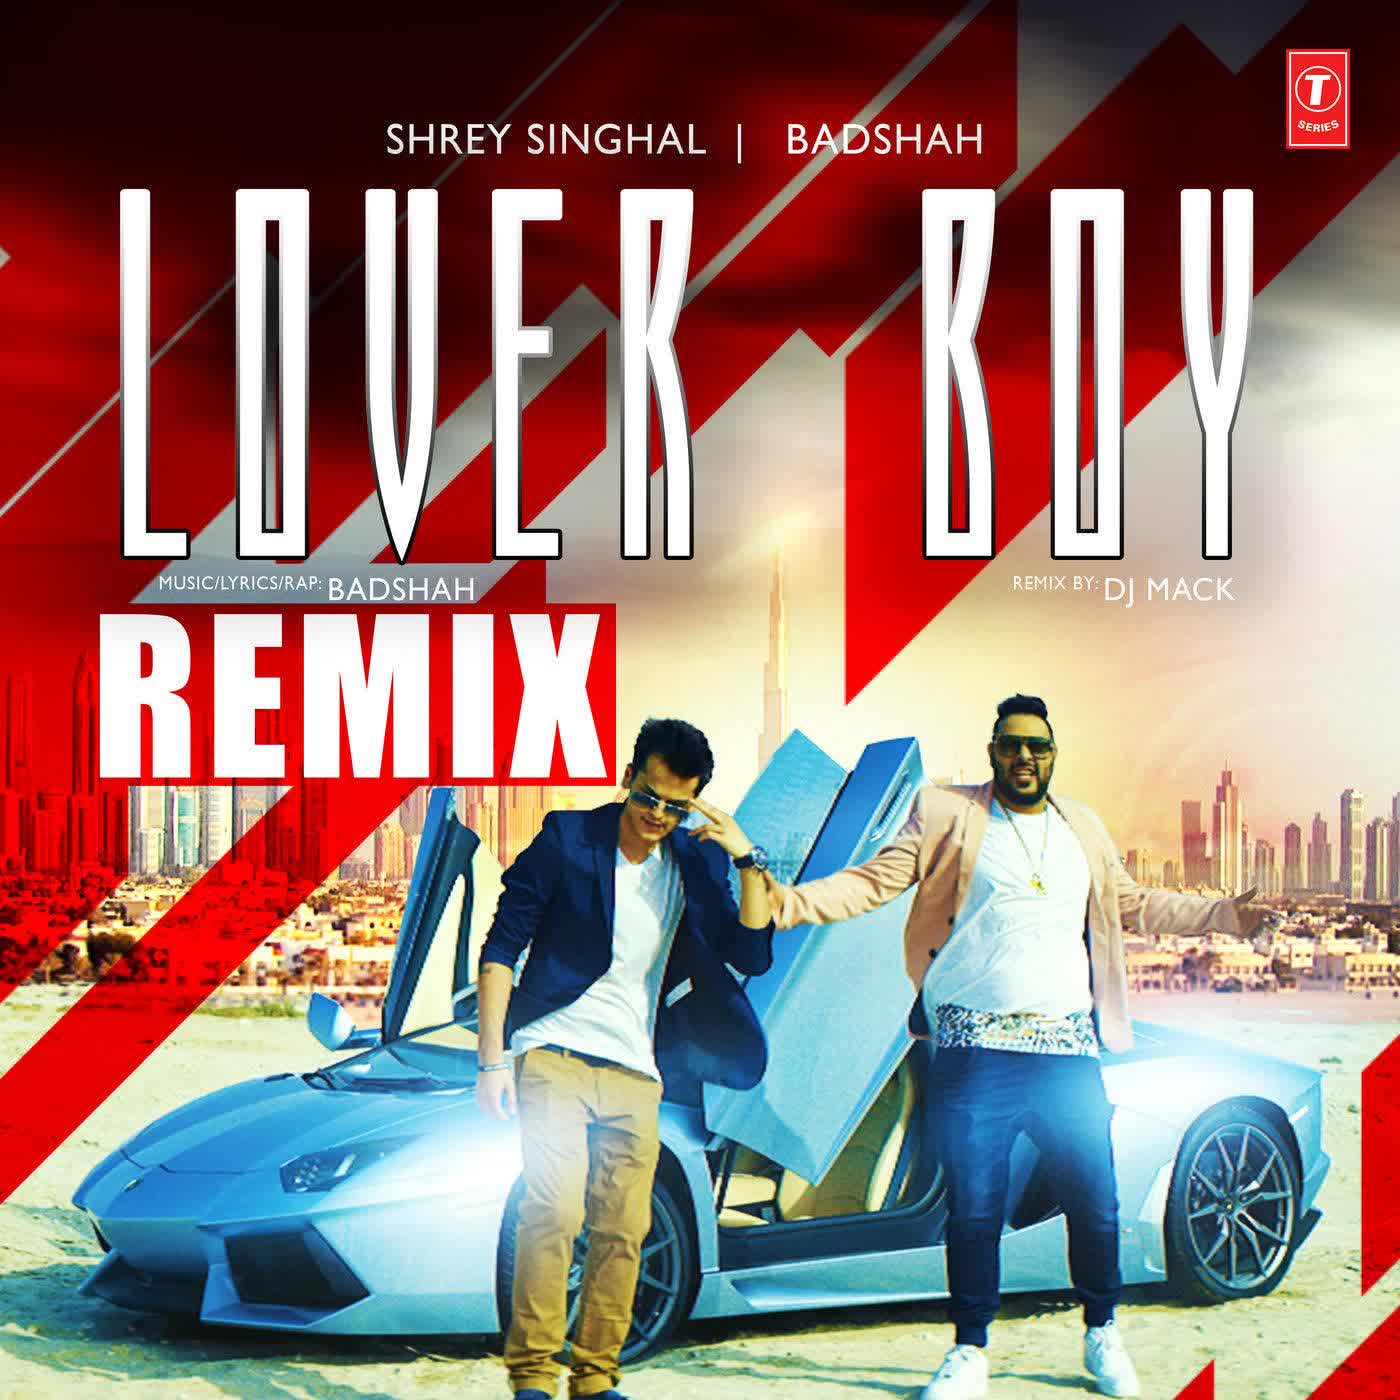 Lover Boy (Remix) Shrey Singhal  Mp3 song download